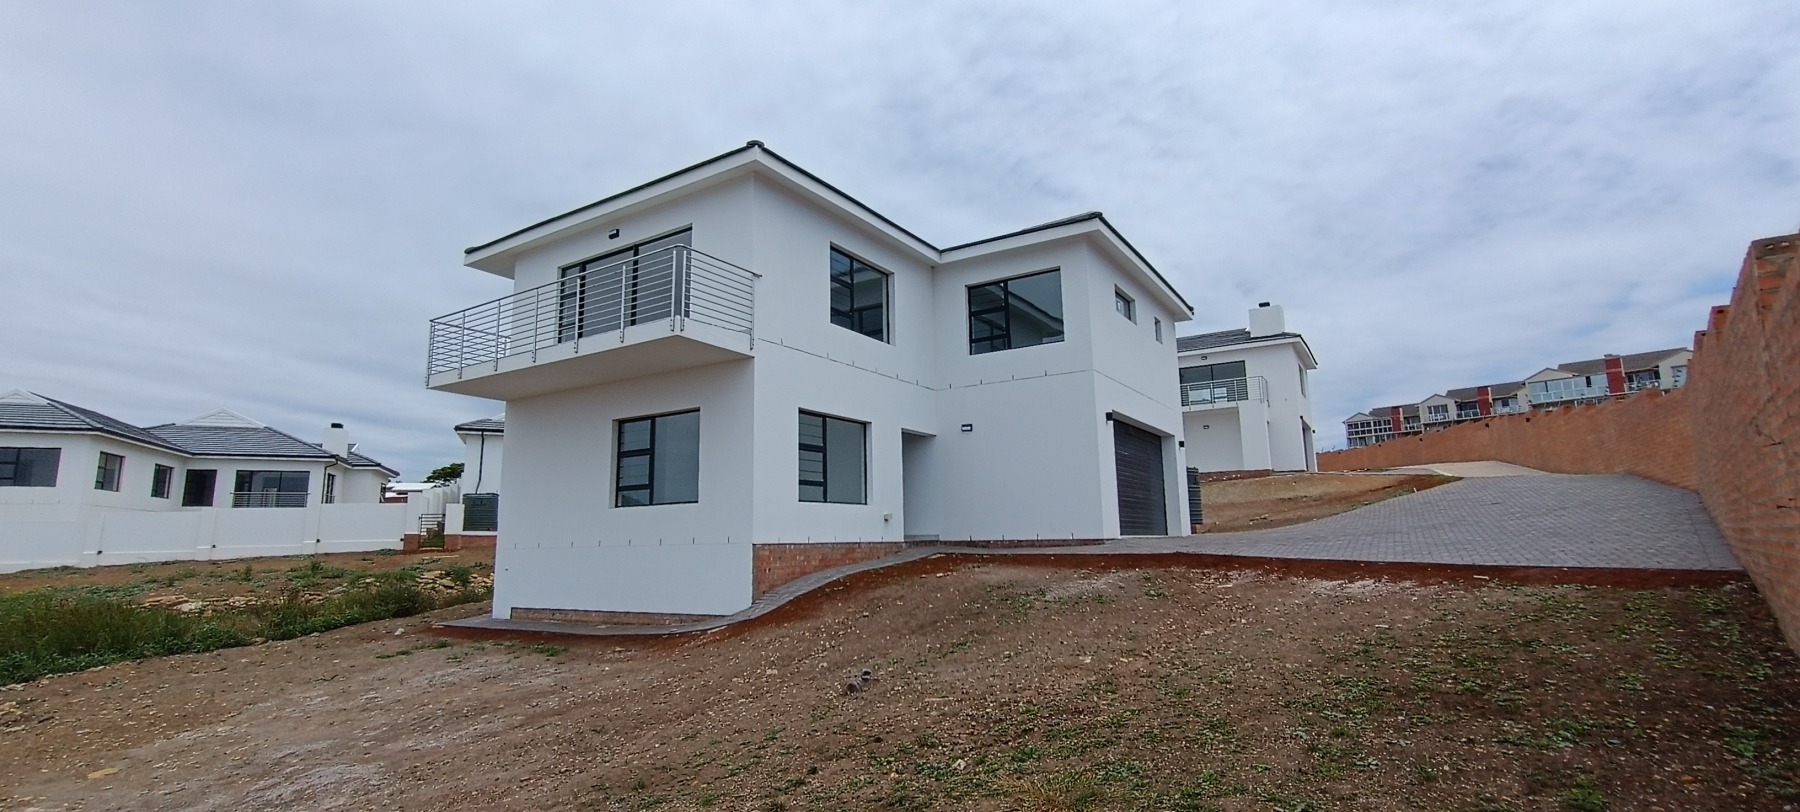 new three bedroom house figtree lifestyle estate jeffreys bay 001